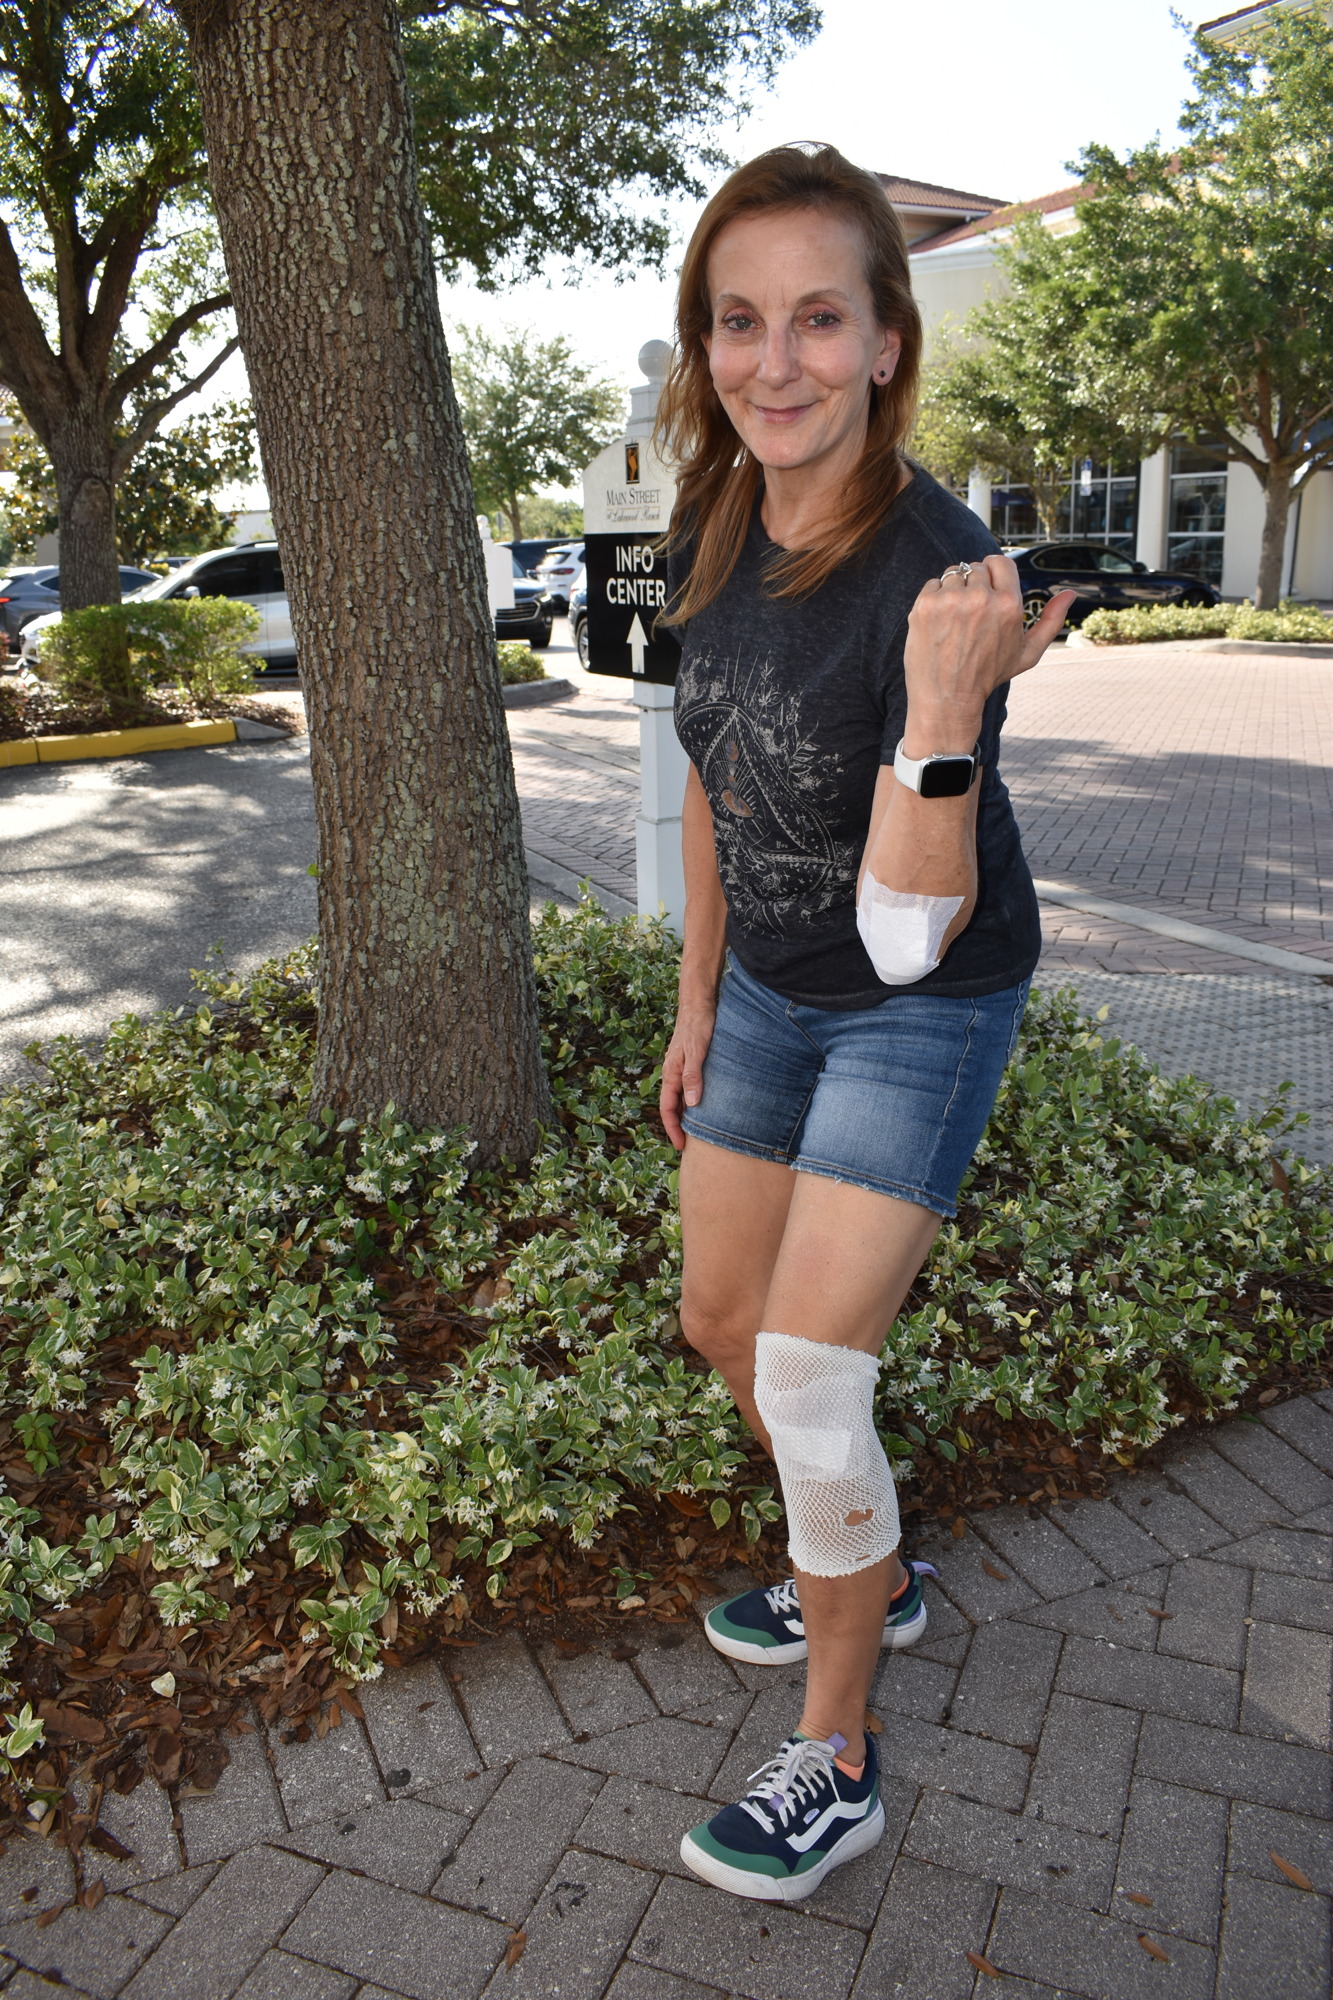 Two weeks after her incident on The Masters Avenue, Andrea Sacchetti still had her injuries bandaged.